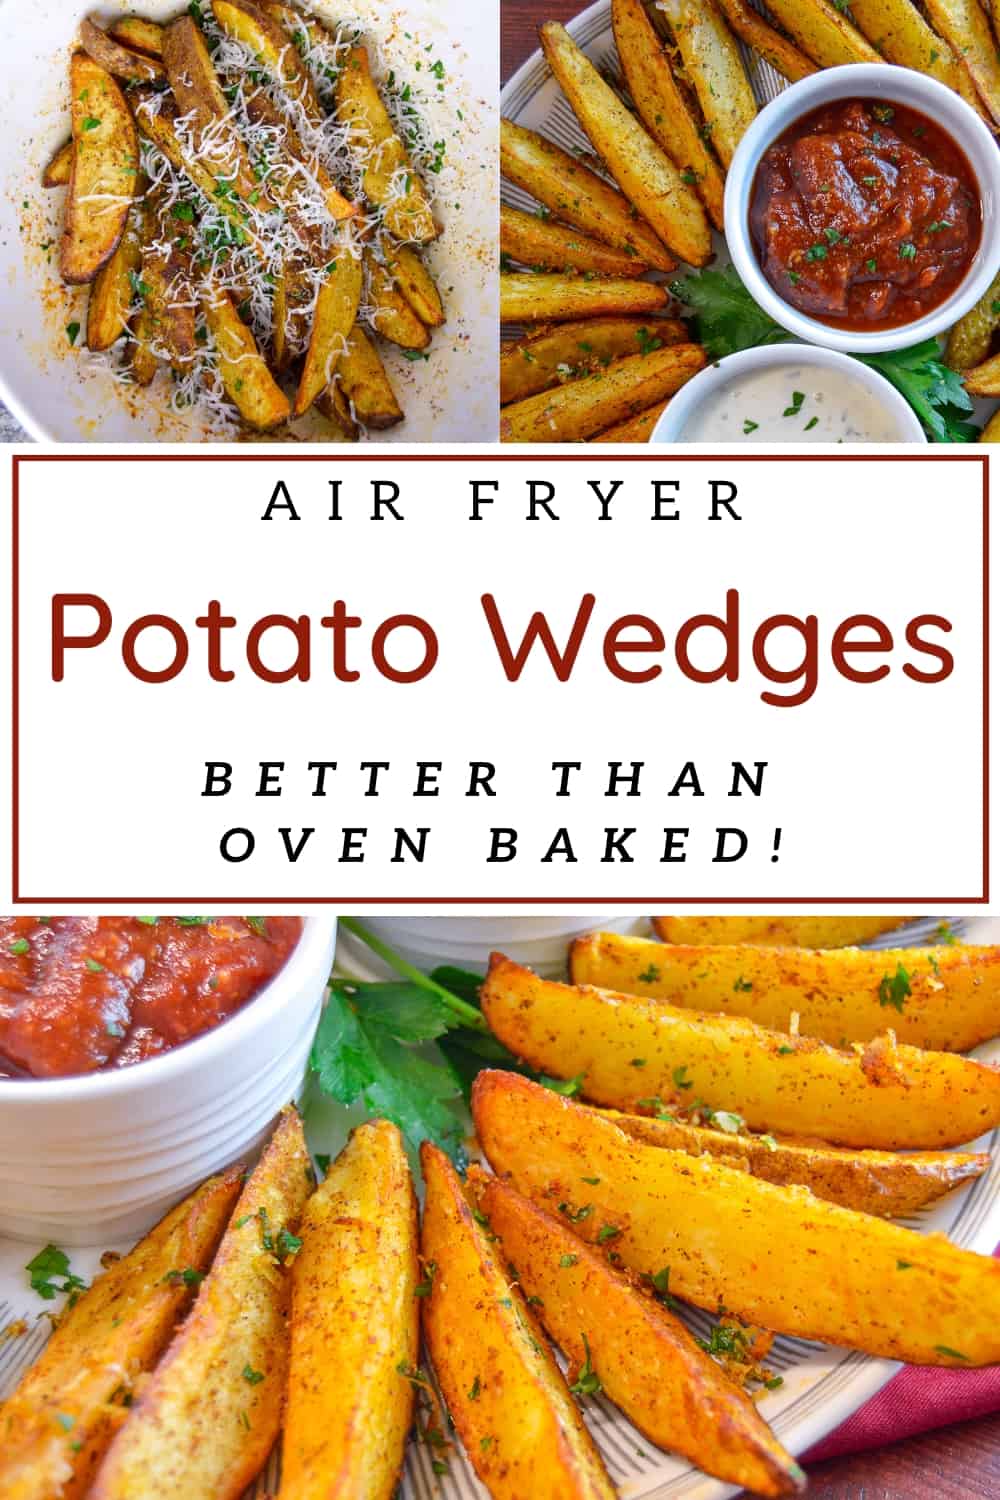 Air Fryer Potato Wedges Better Than Baked Pinterest Pin with 3 pictures, upper left mixed in bowl, upper right on plate with 2 sauces, lower close up view of wedges on plate with ketchup and parsley.